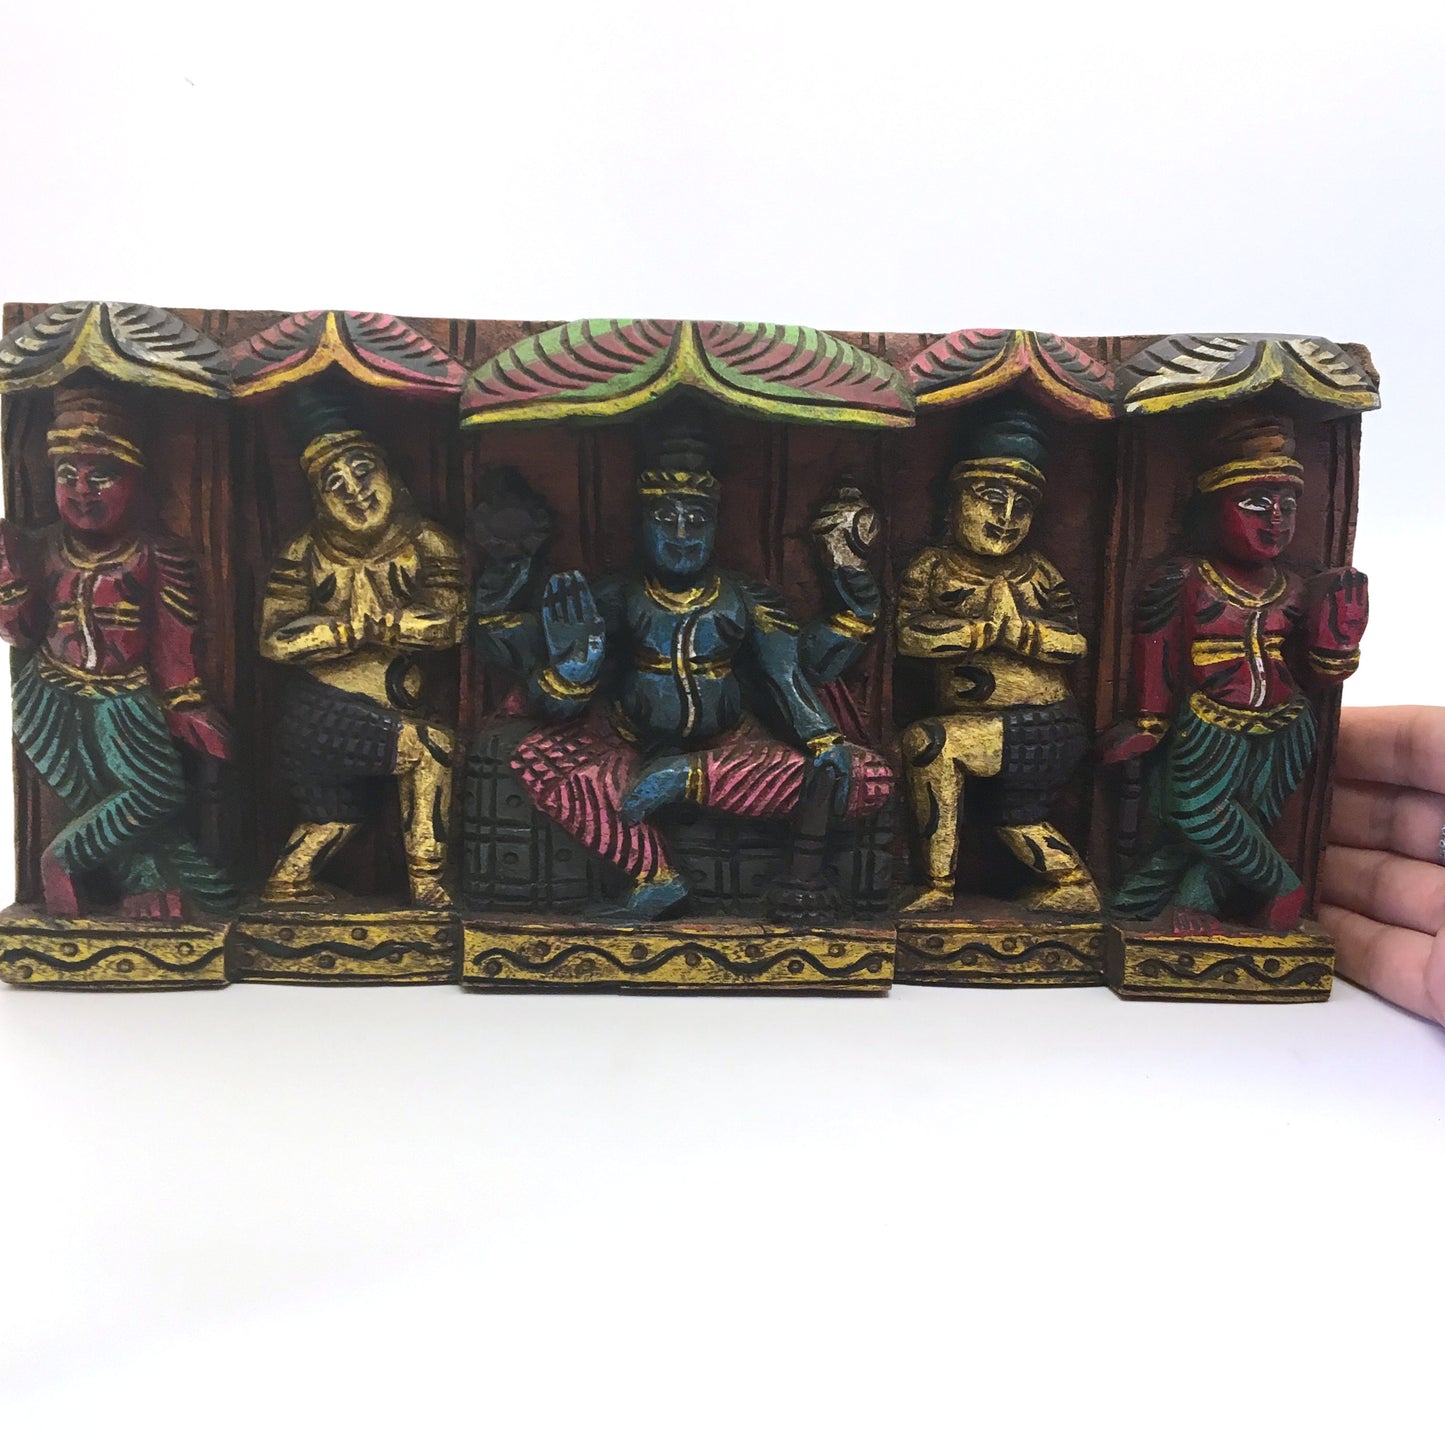 Hand-carved India Colorful Decorative All Wood Wall Hanging Panel Plaque 5.75"